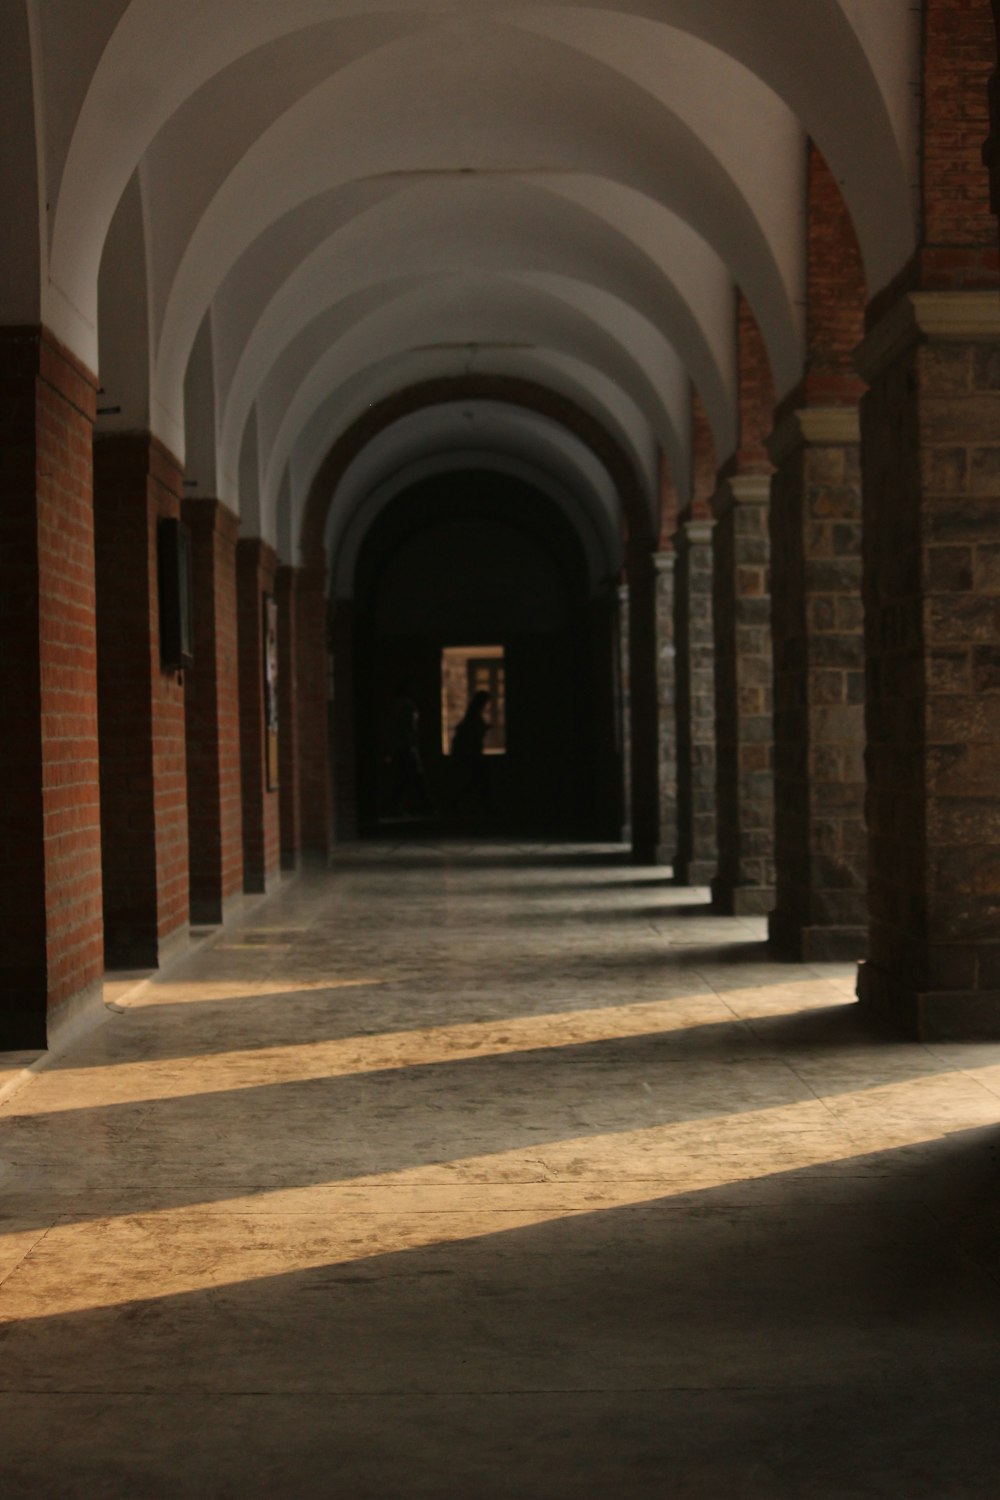 a long hallway with arches and a clock on the wall